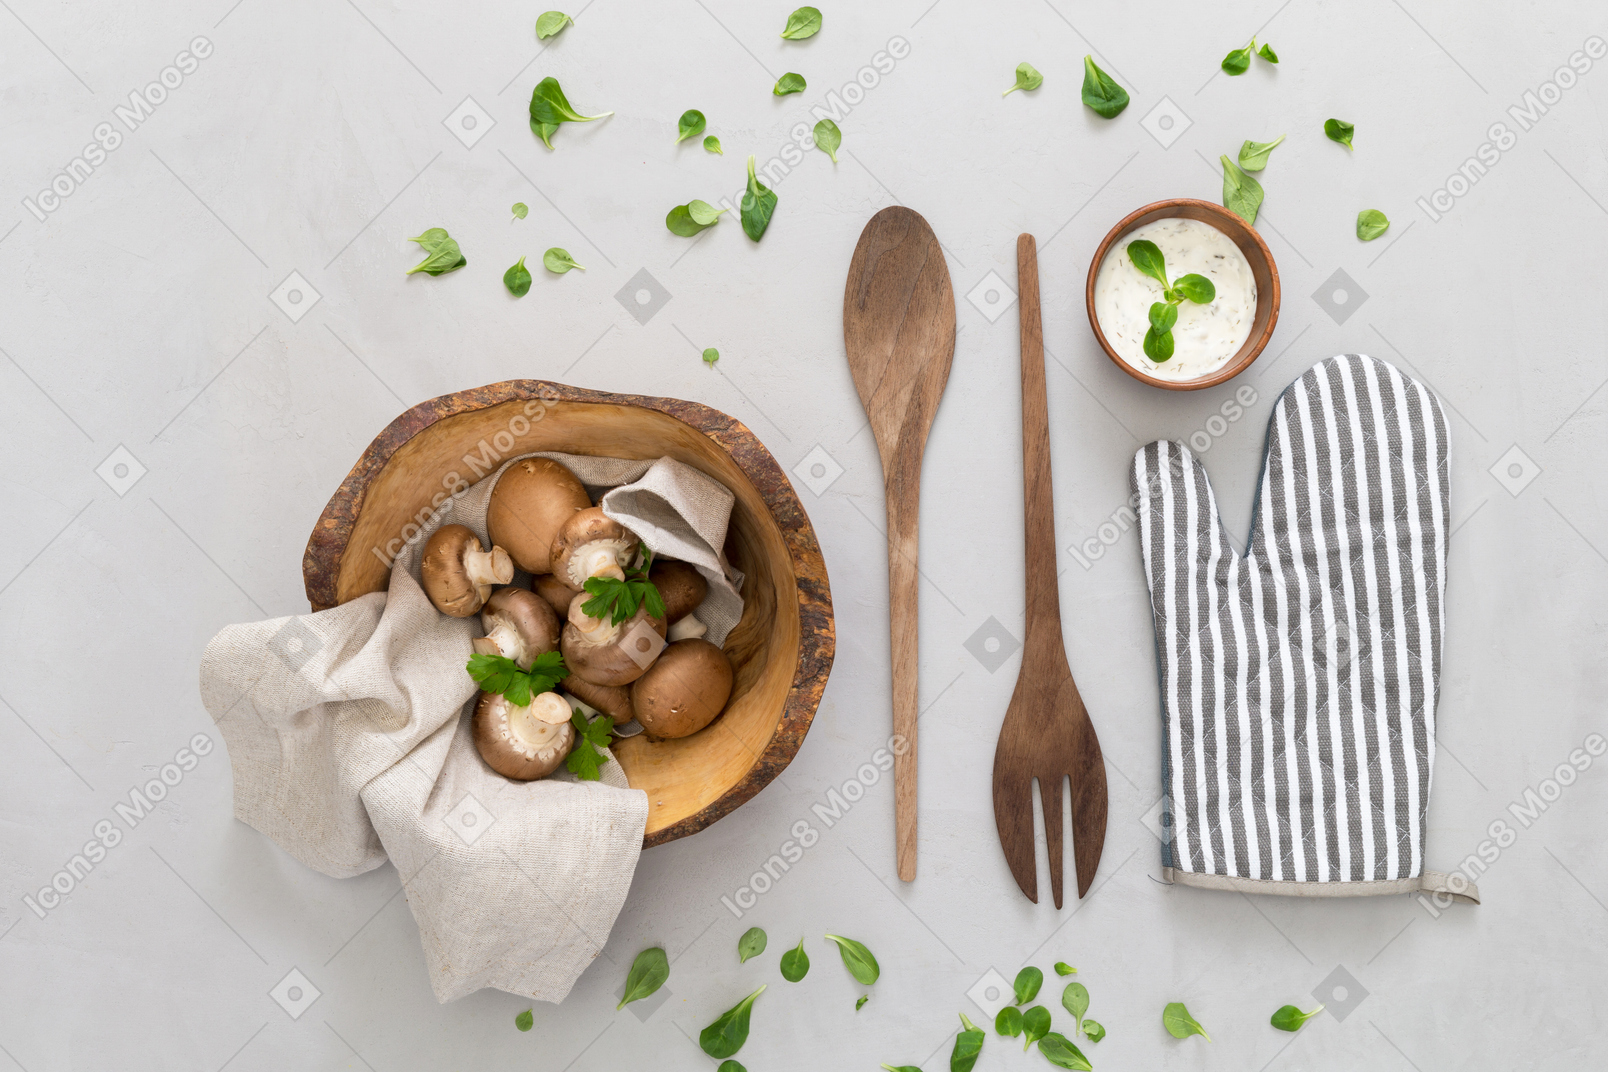 Mushrooms in wooden bowl, wooden cutlery, spices and oven glove